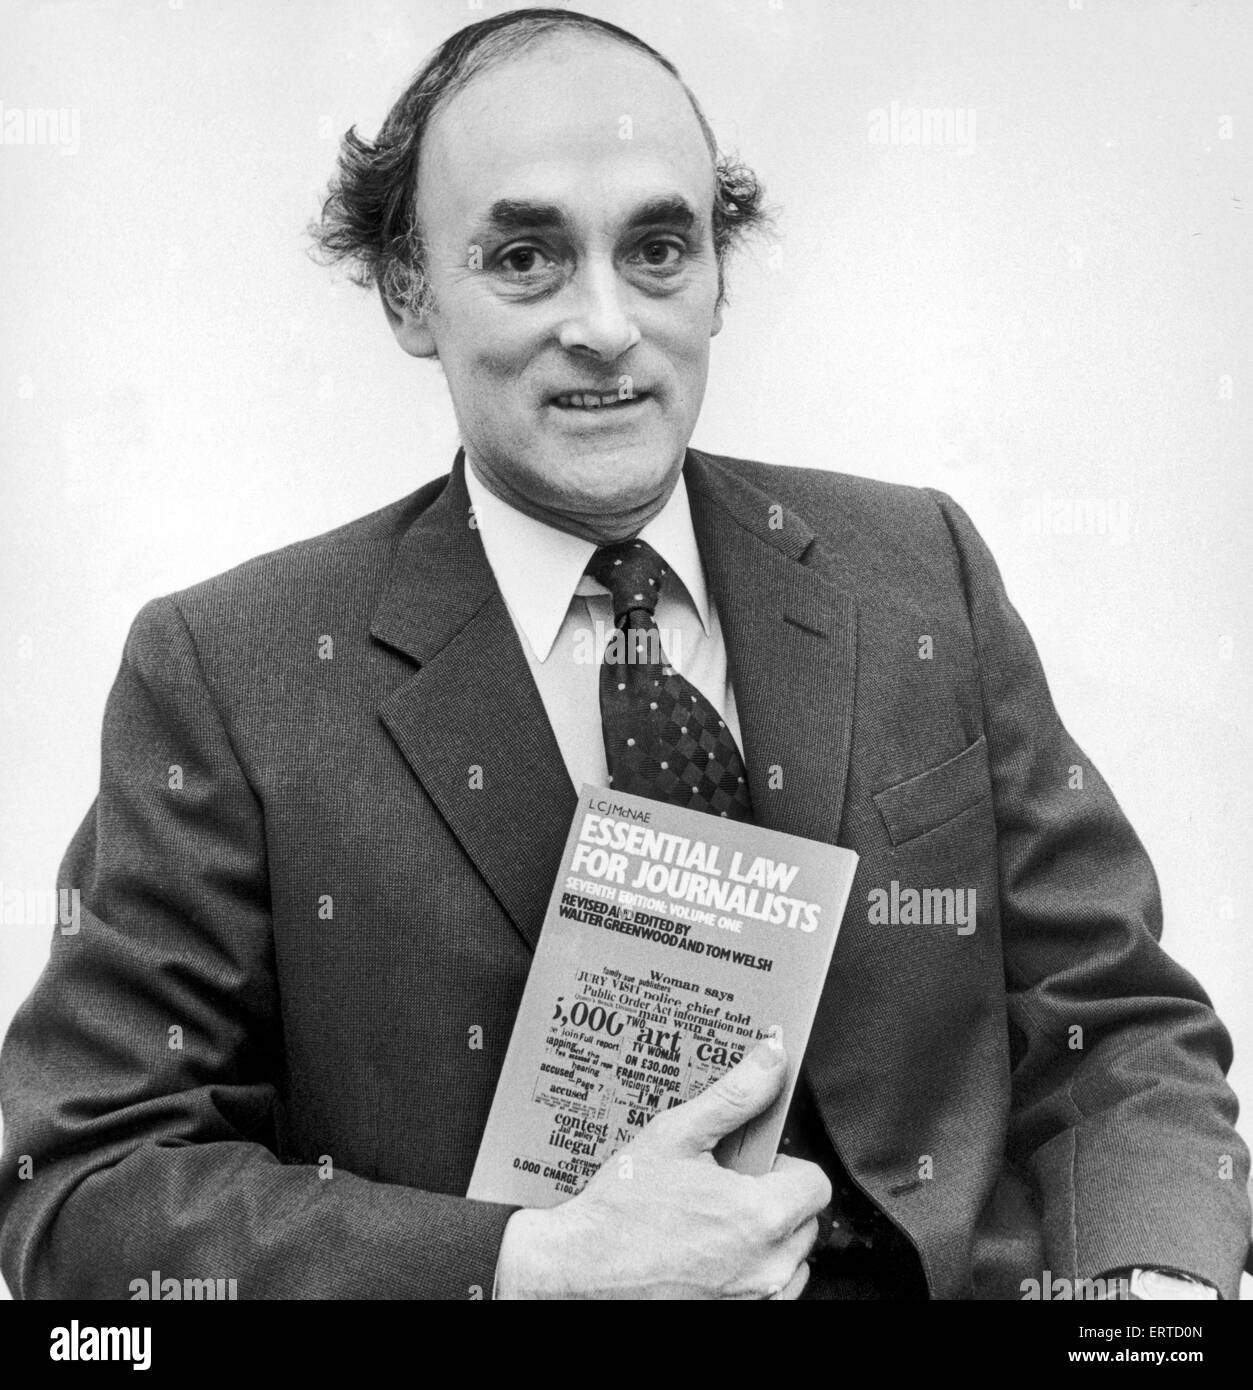 Walter Greenwood, former deputy news editor of the Evening Gazette and joint editor of a book on newspaper law for journalists, 'Essential Law for Journalists'. Himself and Tom Welsh have revised and edited the seventh edition of this book. 11th January 1980. Stock Photo